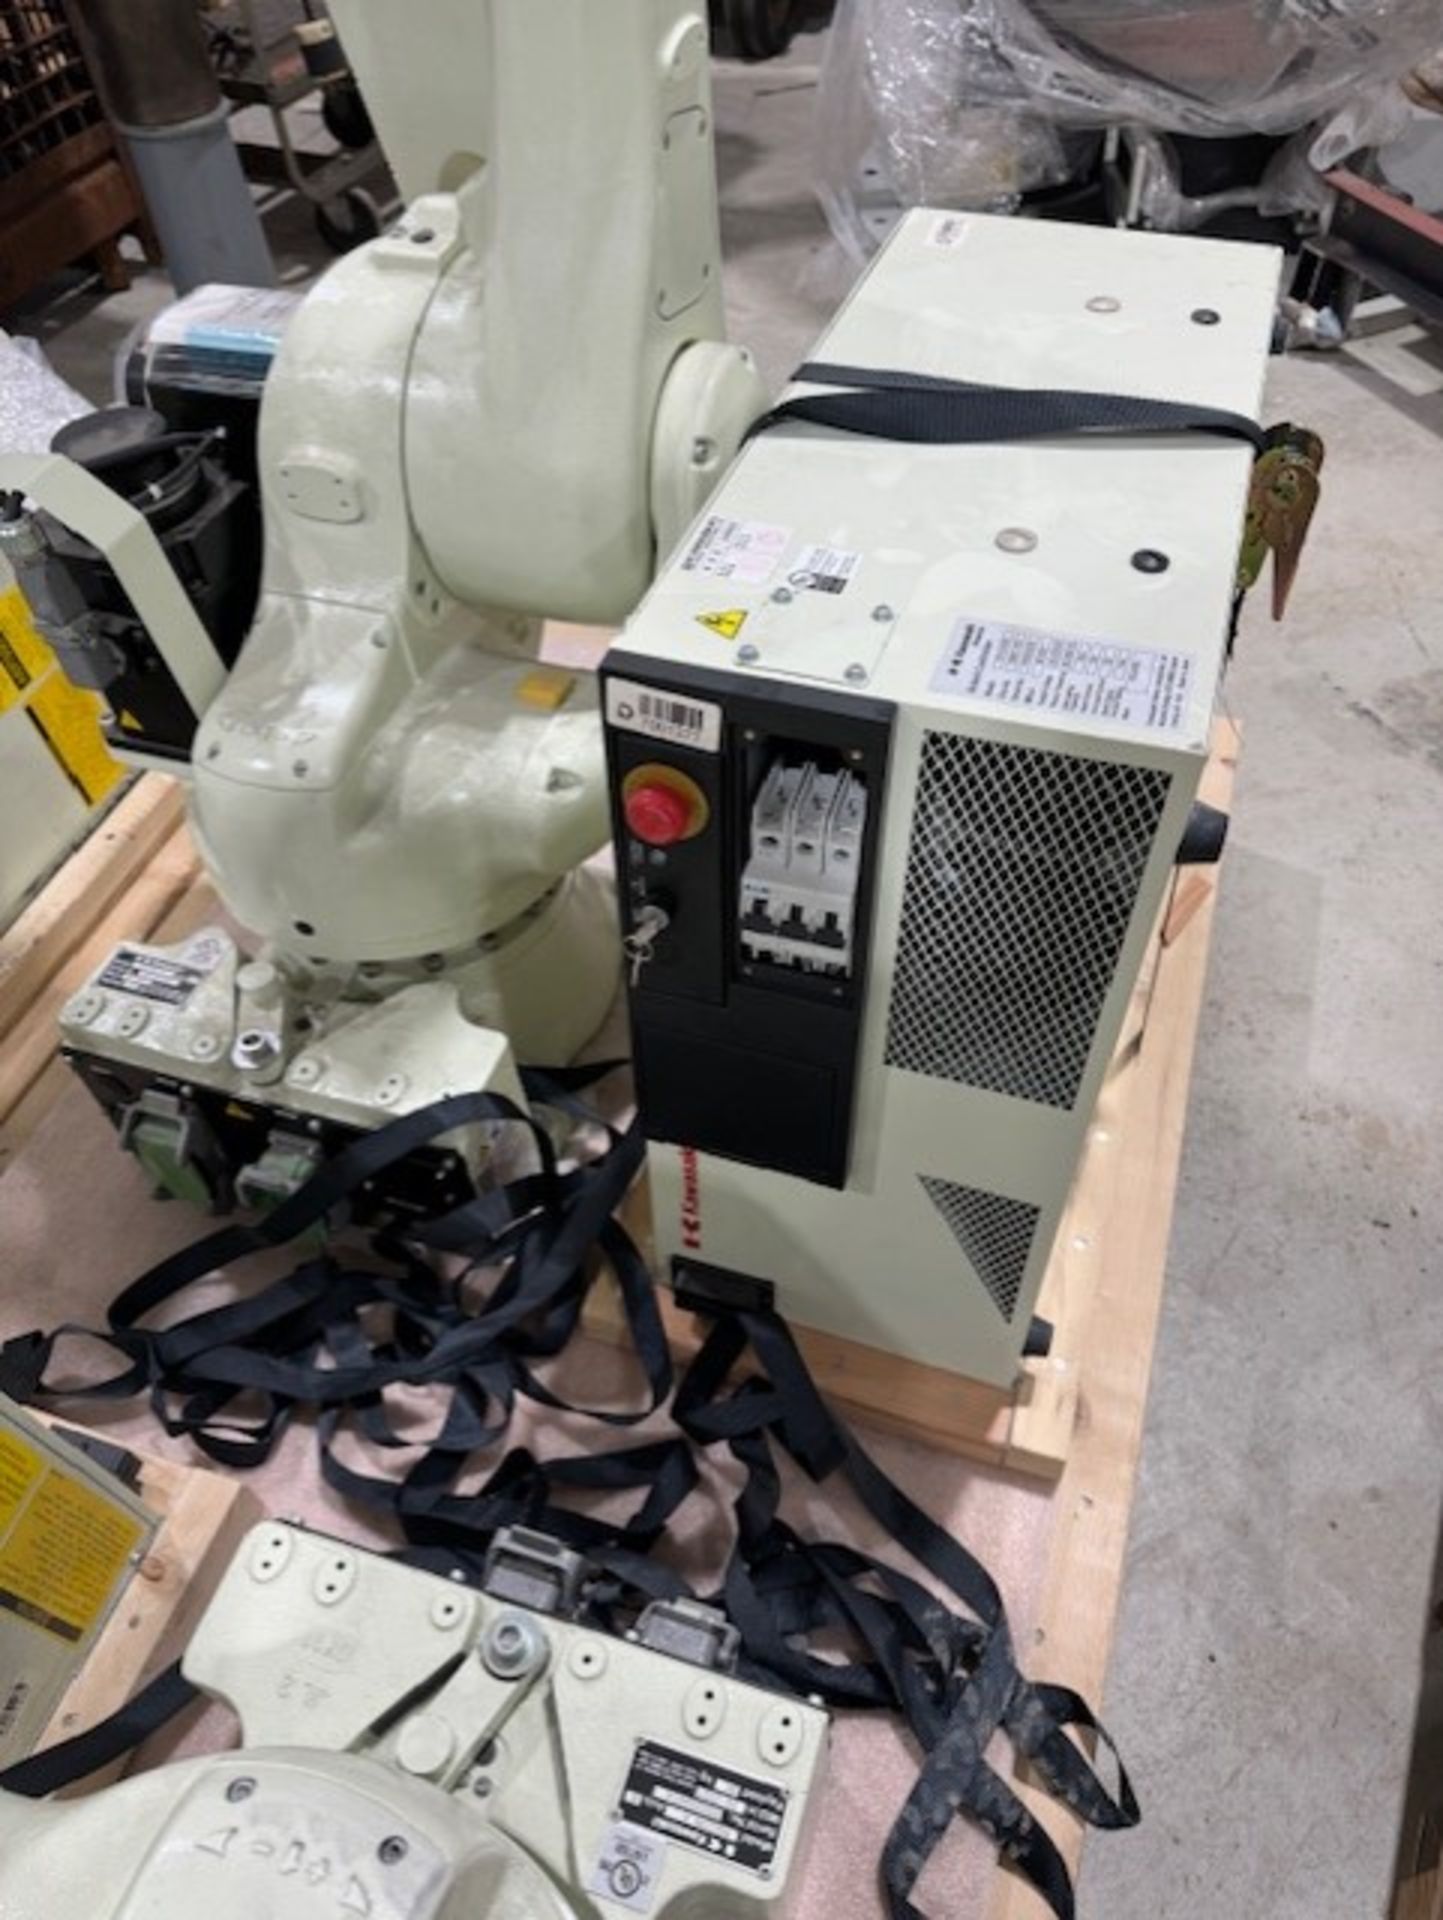 LIGHTLY USED KAWASAKI ROBOT RS020N, SN 4208, 20KG X 1725MM REACH WITH EO1 CONTROLS, CABLES & TEACH - Image 3 of 7